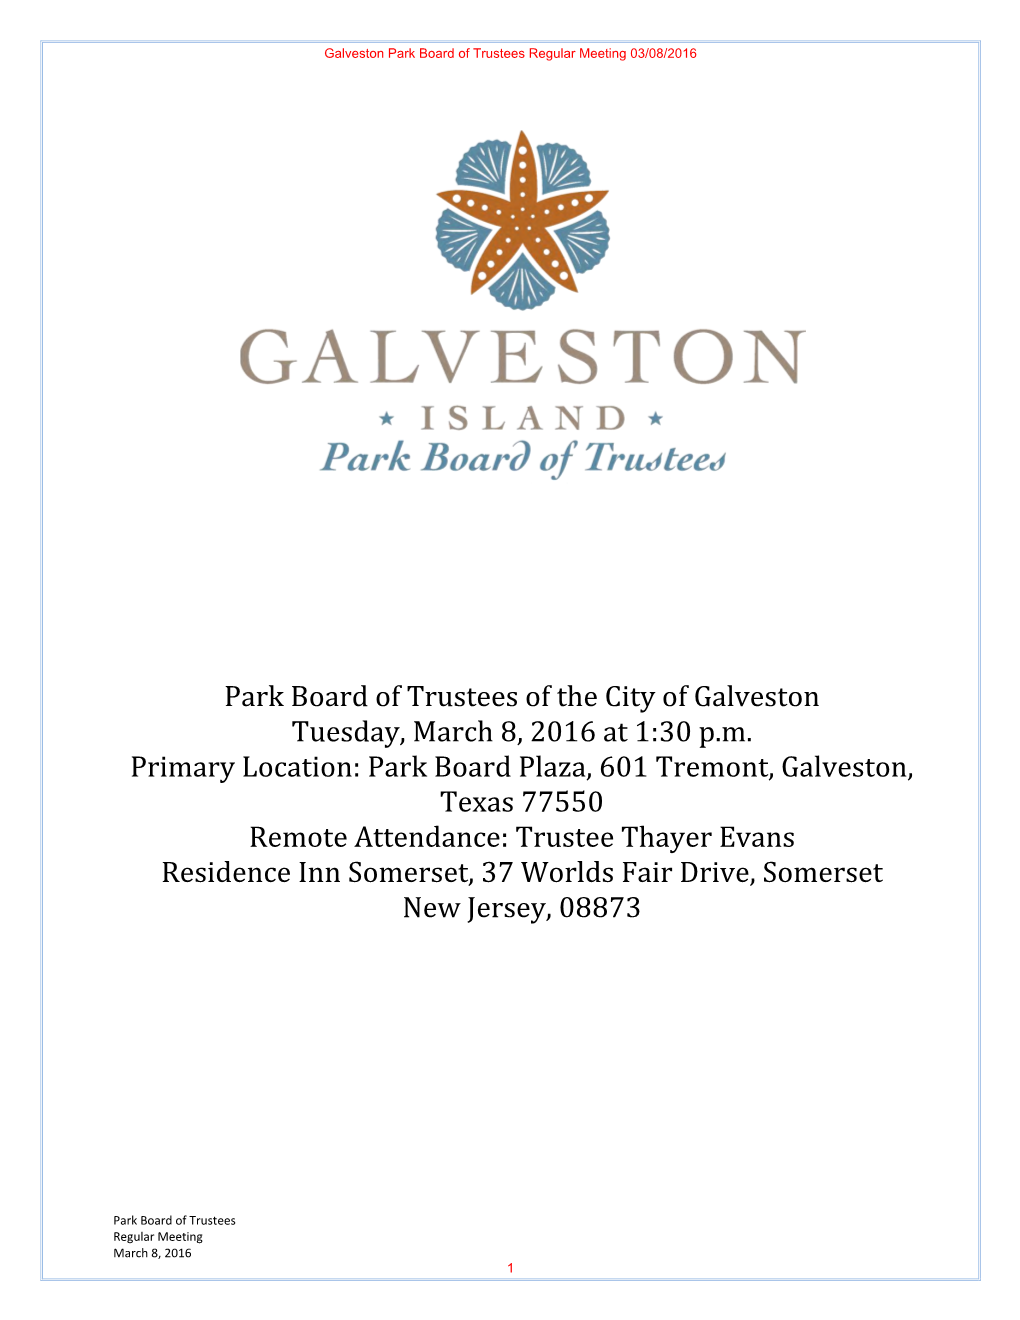 Park Board of Trustees of the City of Galveston Tuesday, March 8, 2016 at 1:30 P.M